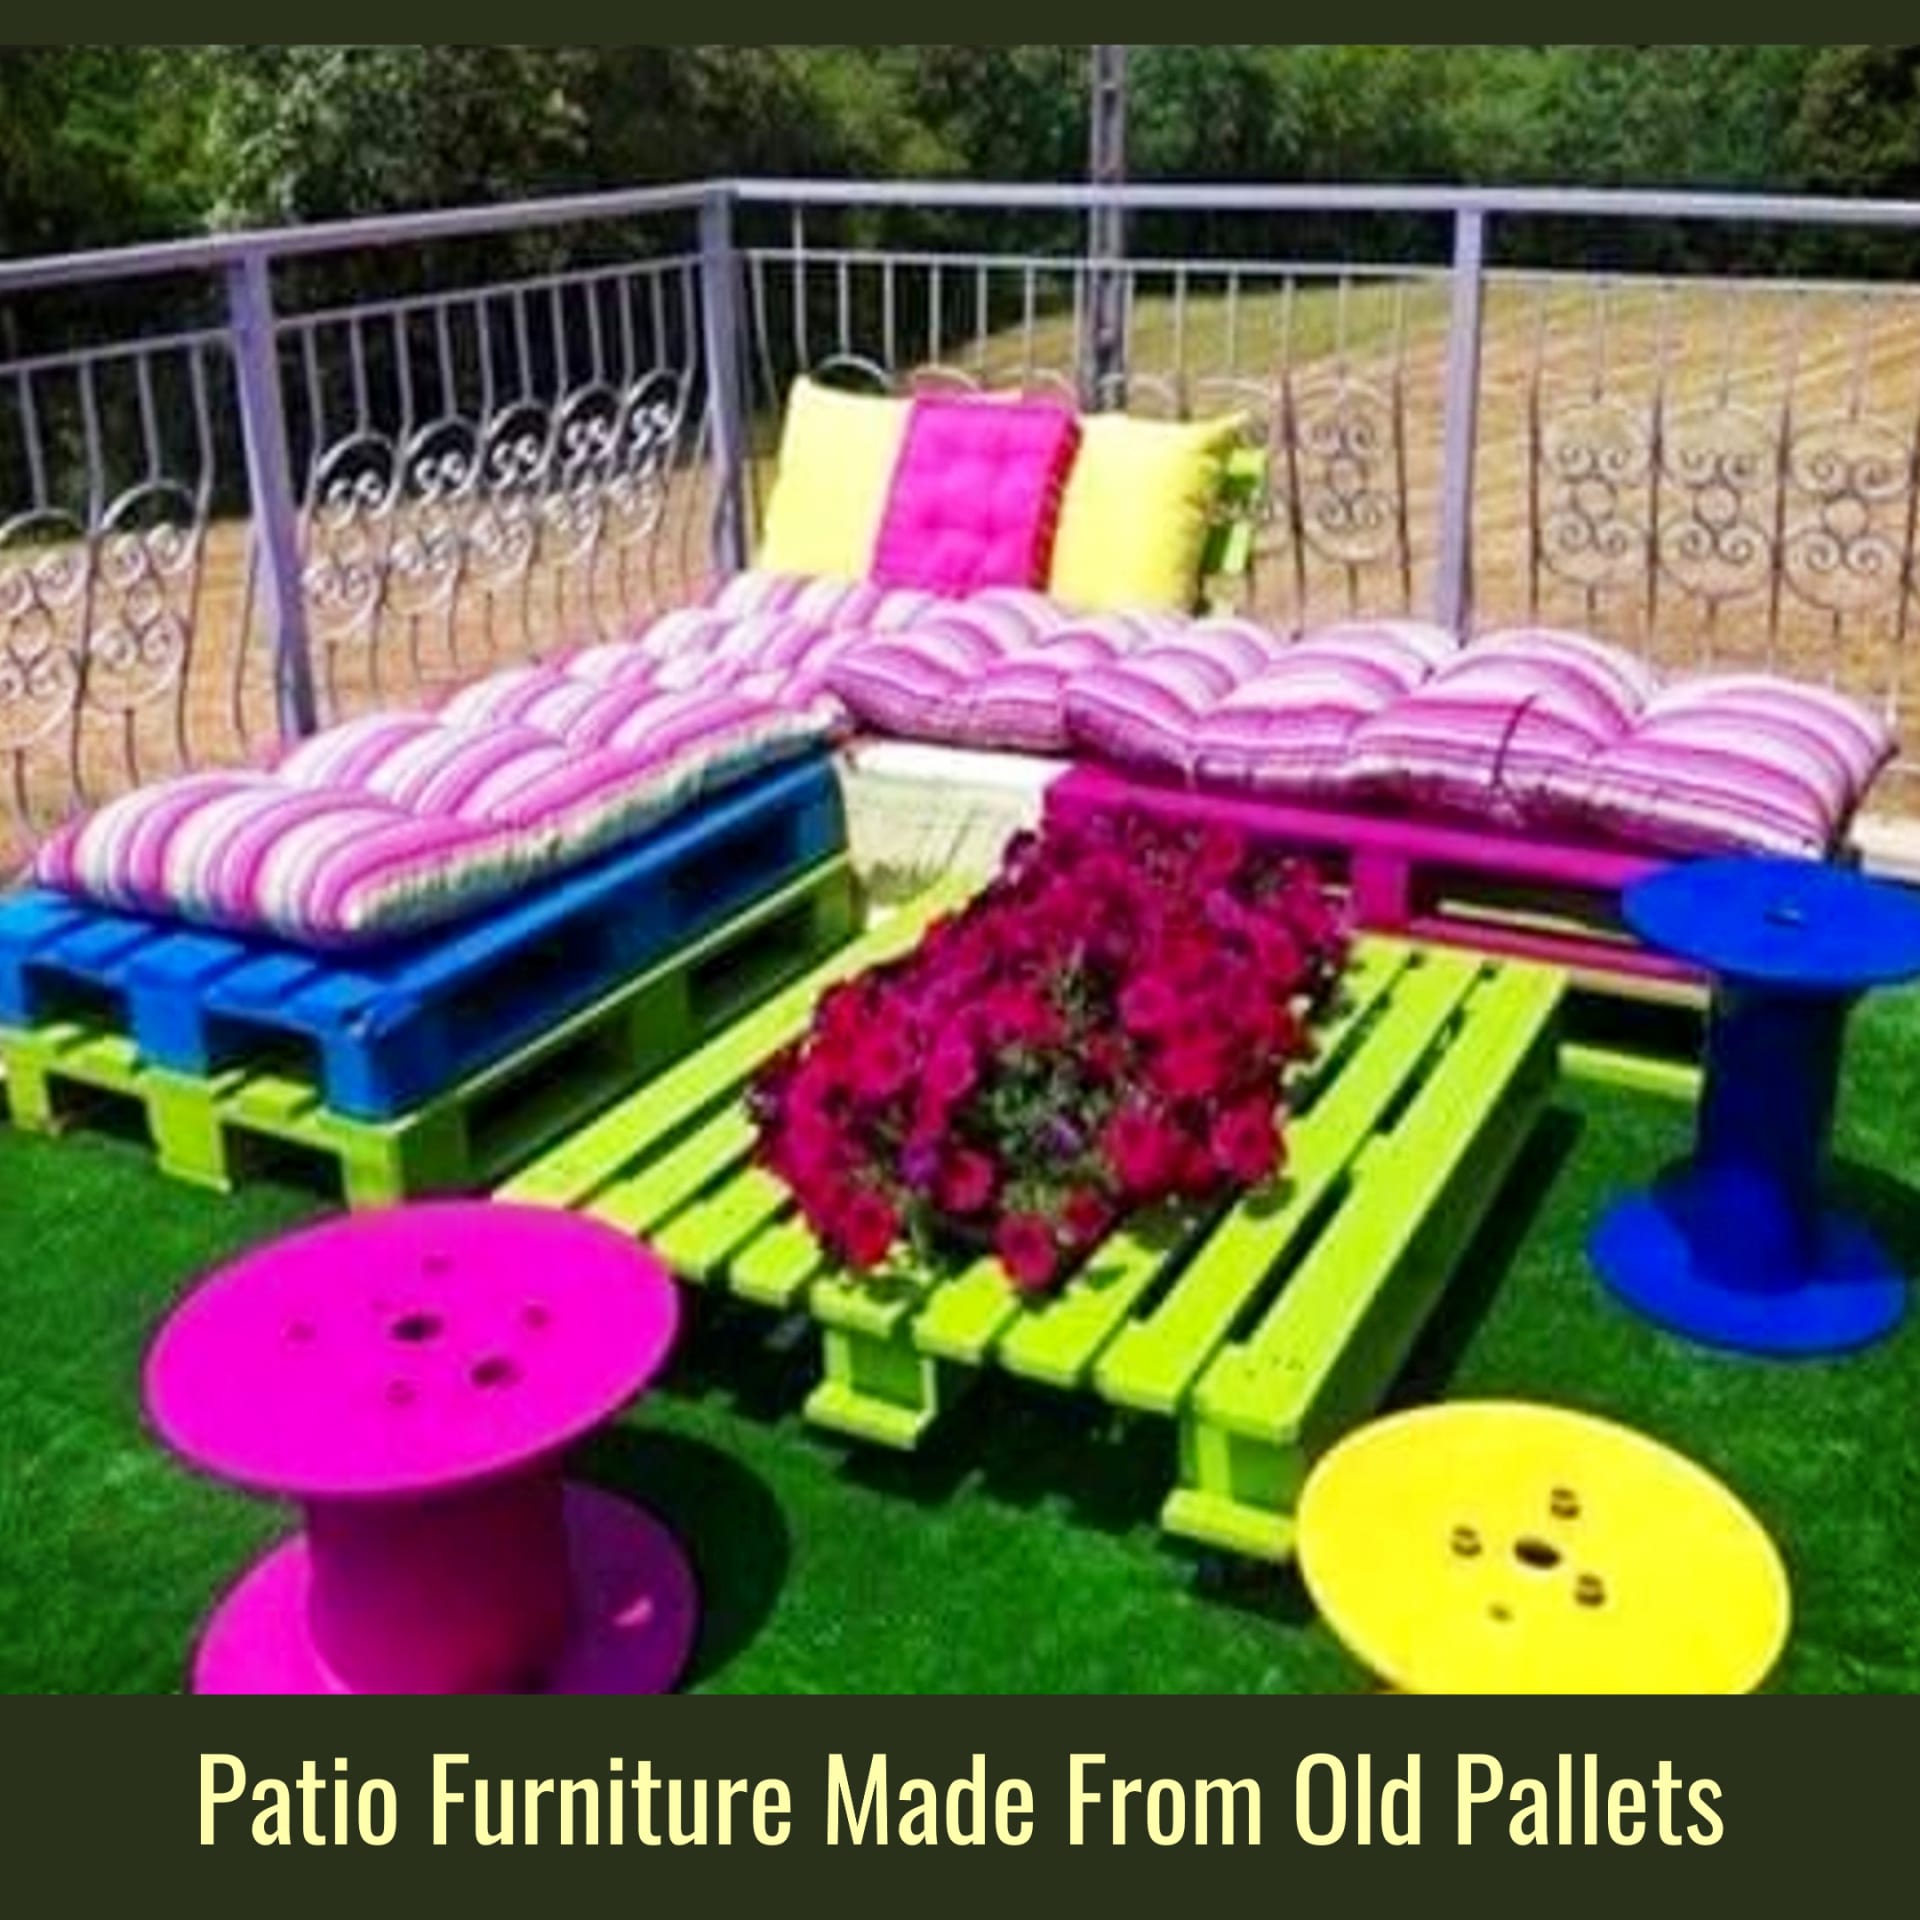 Pallet Projects - Easy DIY outdoor pallet furniture and pallet projects to make or sell - VERY clever pallet projects! Pallet pation furniture for your deck, backyard, garden or porch